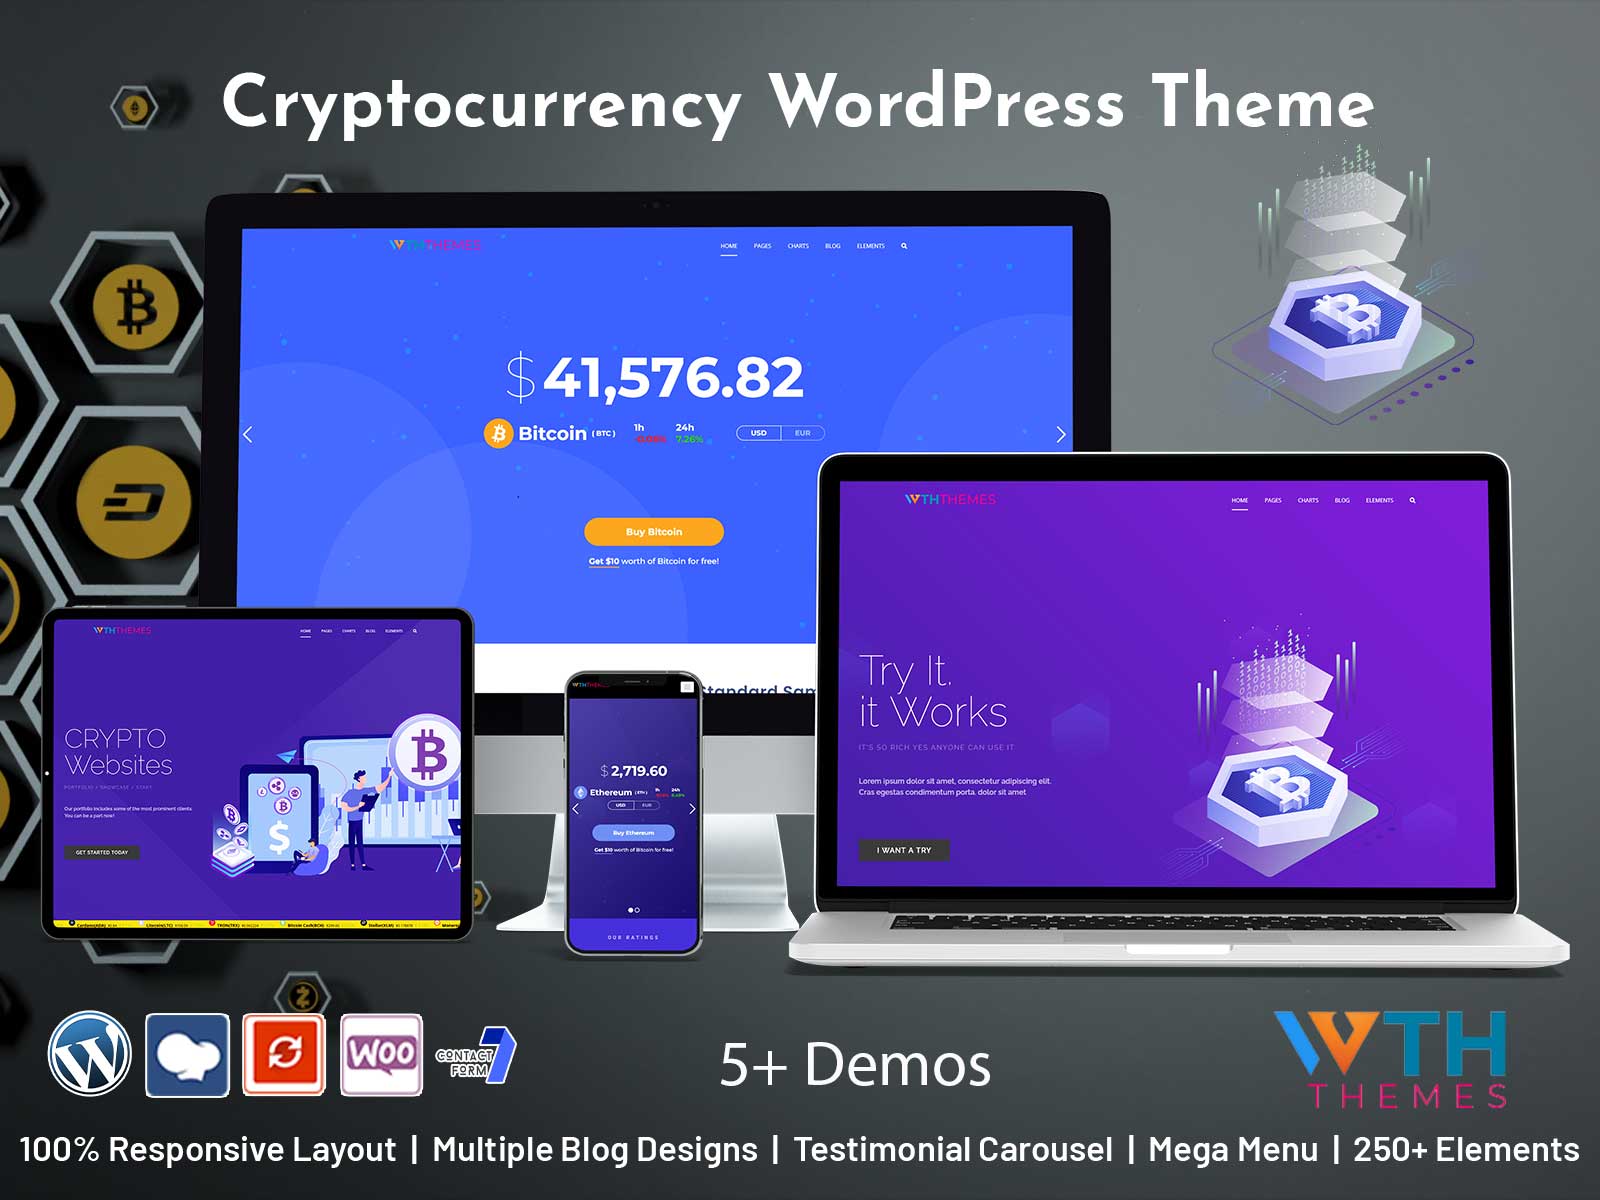 Crypto WordPress Themes Come With Fully Customizable Features